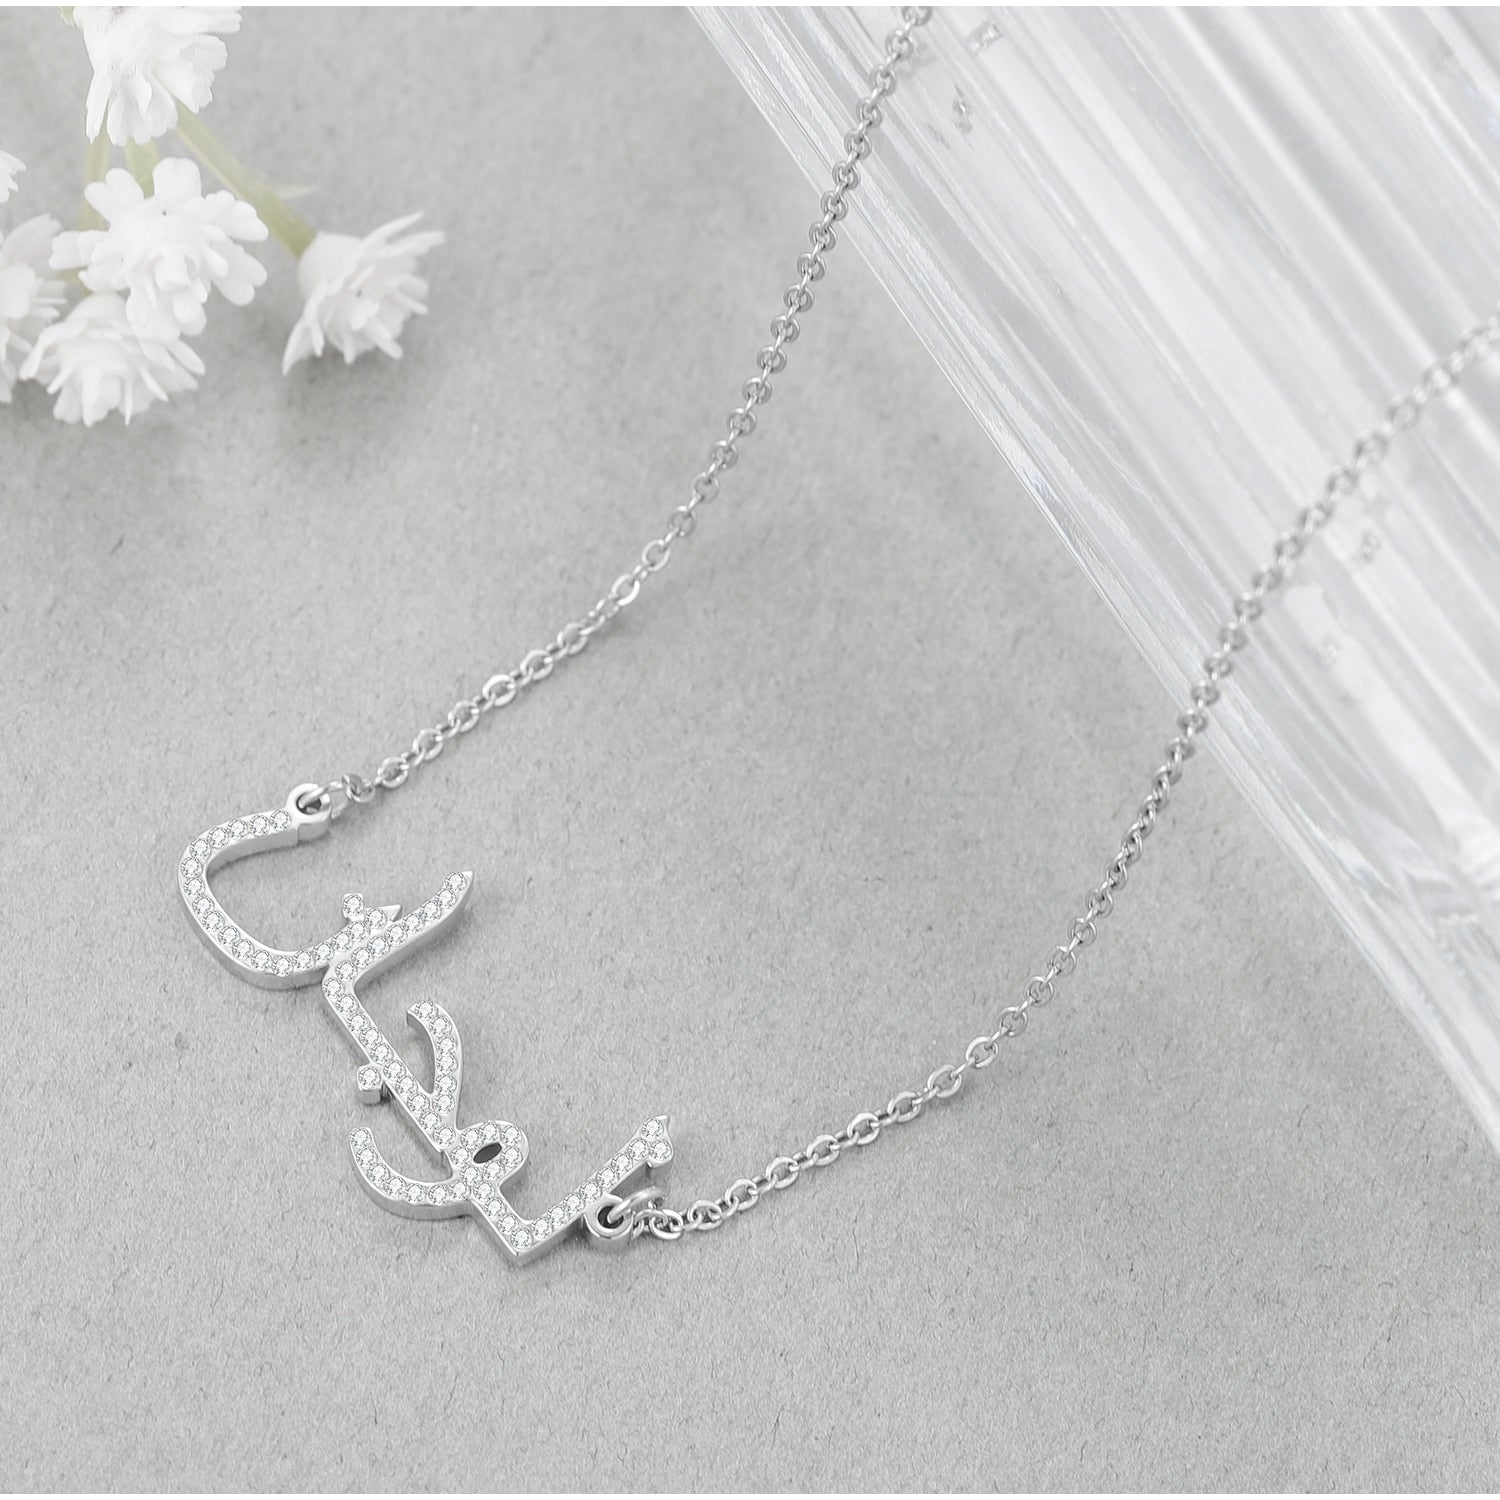 Custom Arabic Name Necklace Personalized Crystal Arabic Pendant Iced Out Names Jewelry For Women Christmas Gift